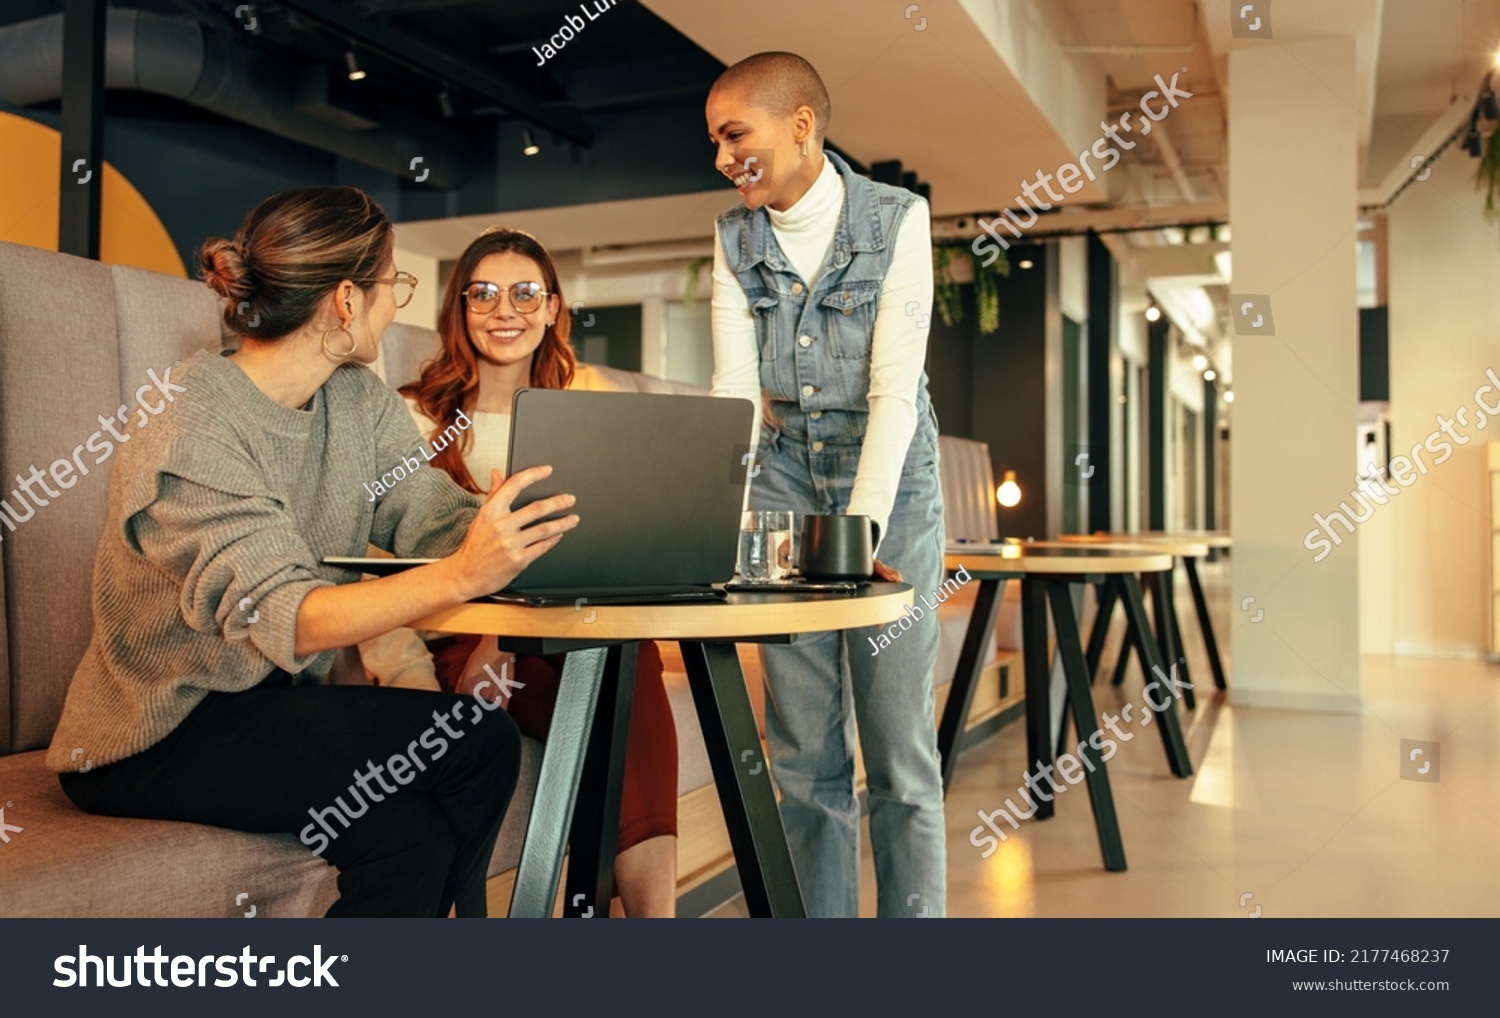 Group of young businesswomen working together in an office lobby. Three happy businesswomen having a discussion in a modern co-working space. Young female entrepreneurs collaborating on a new project. #2177468237